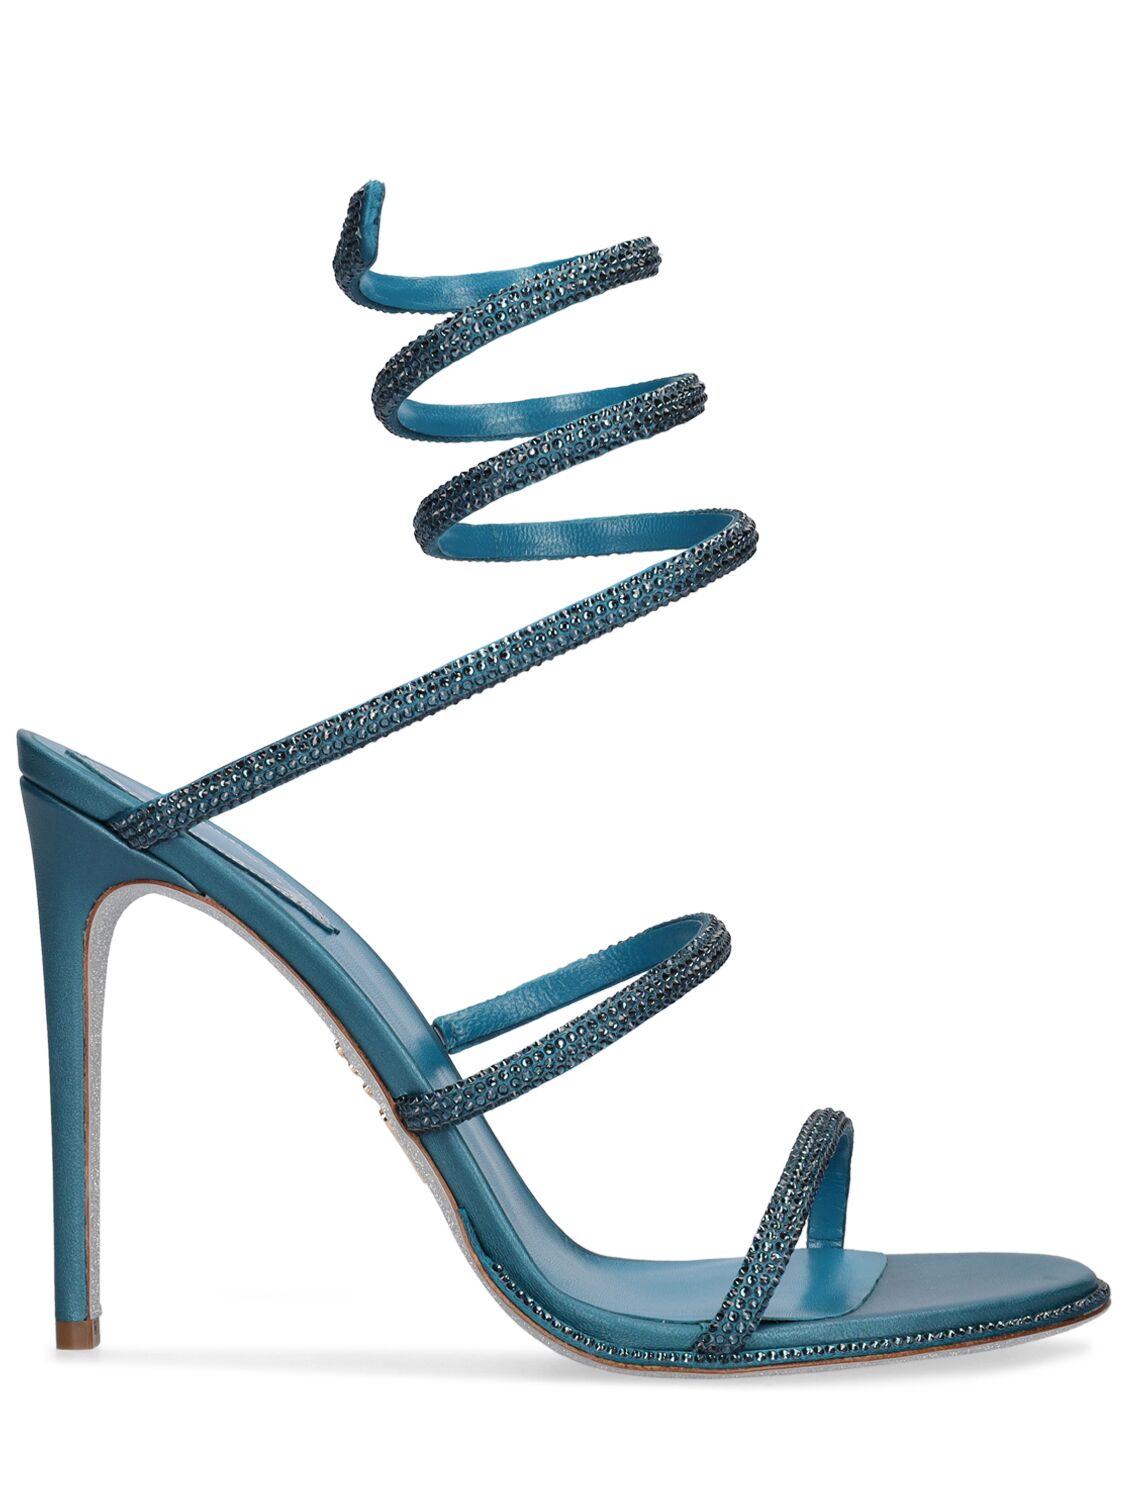 René Caovilla 105mm Embellished Leather Sandals In Turquoise